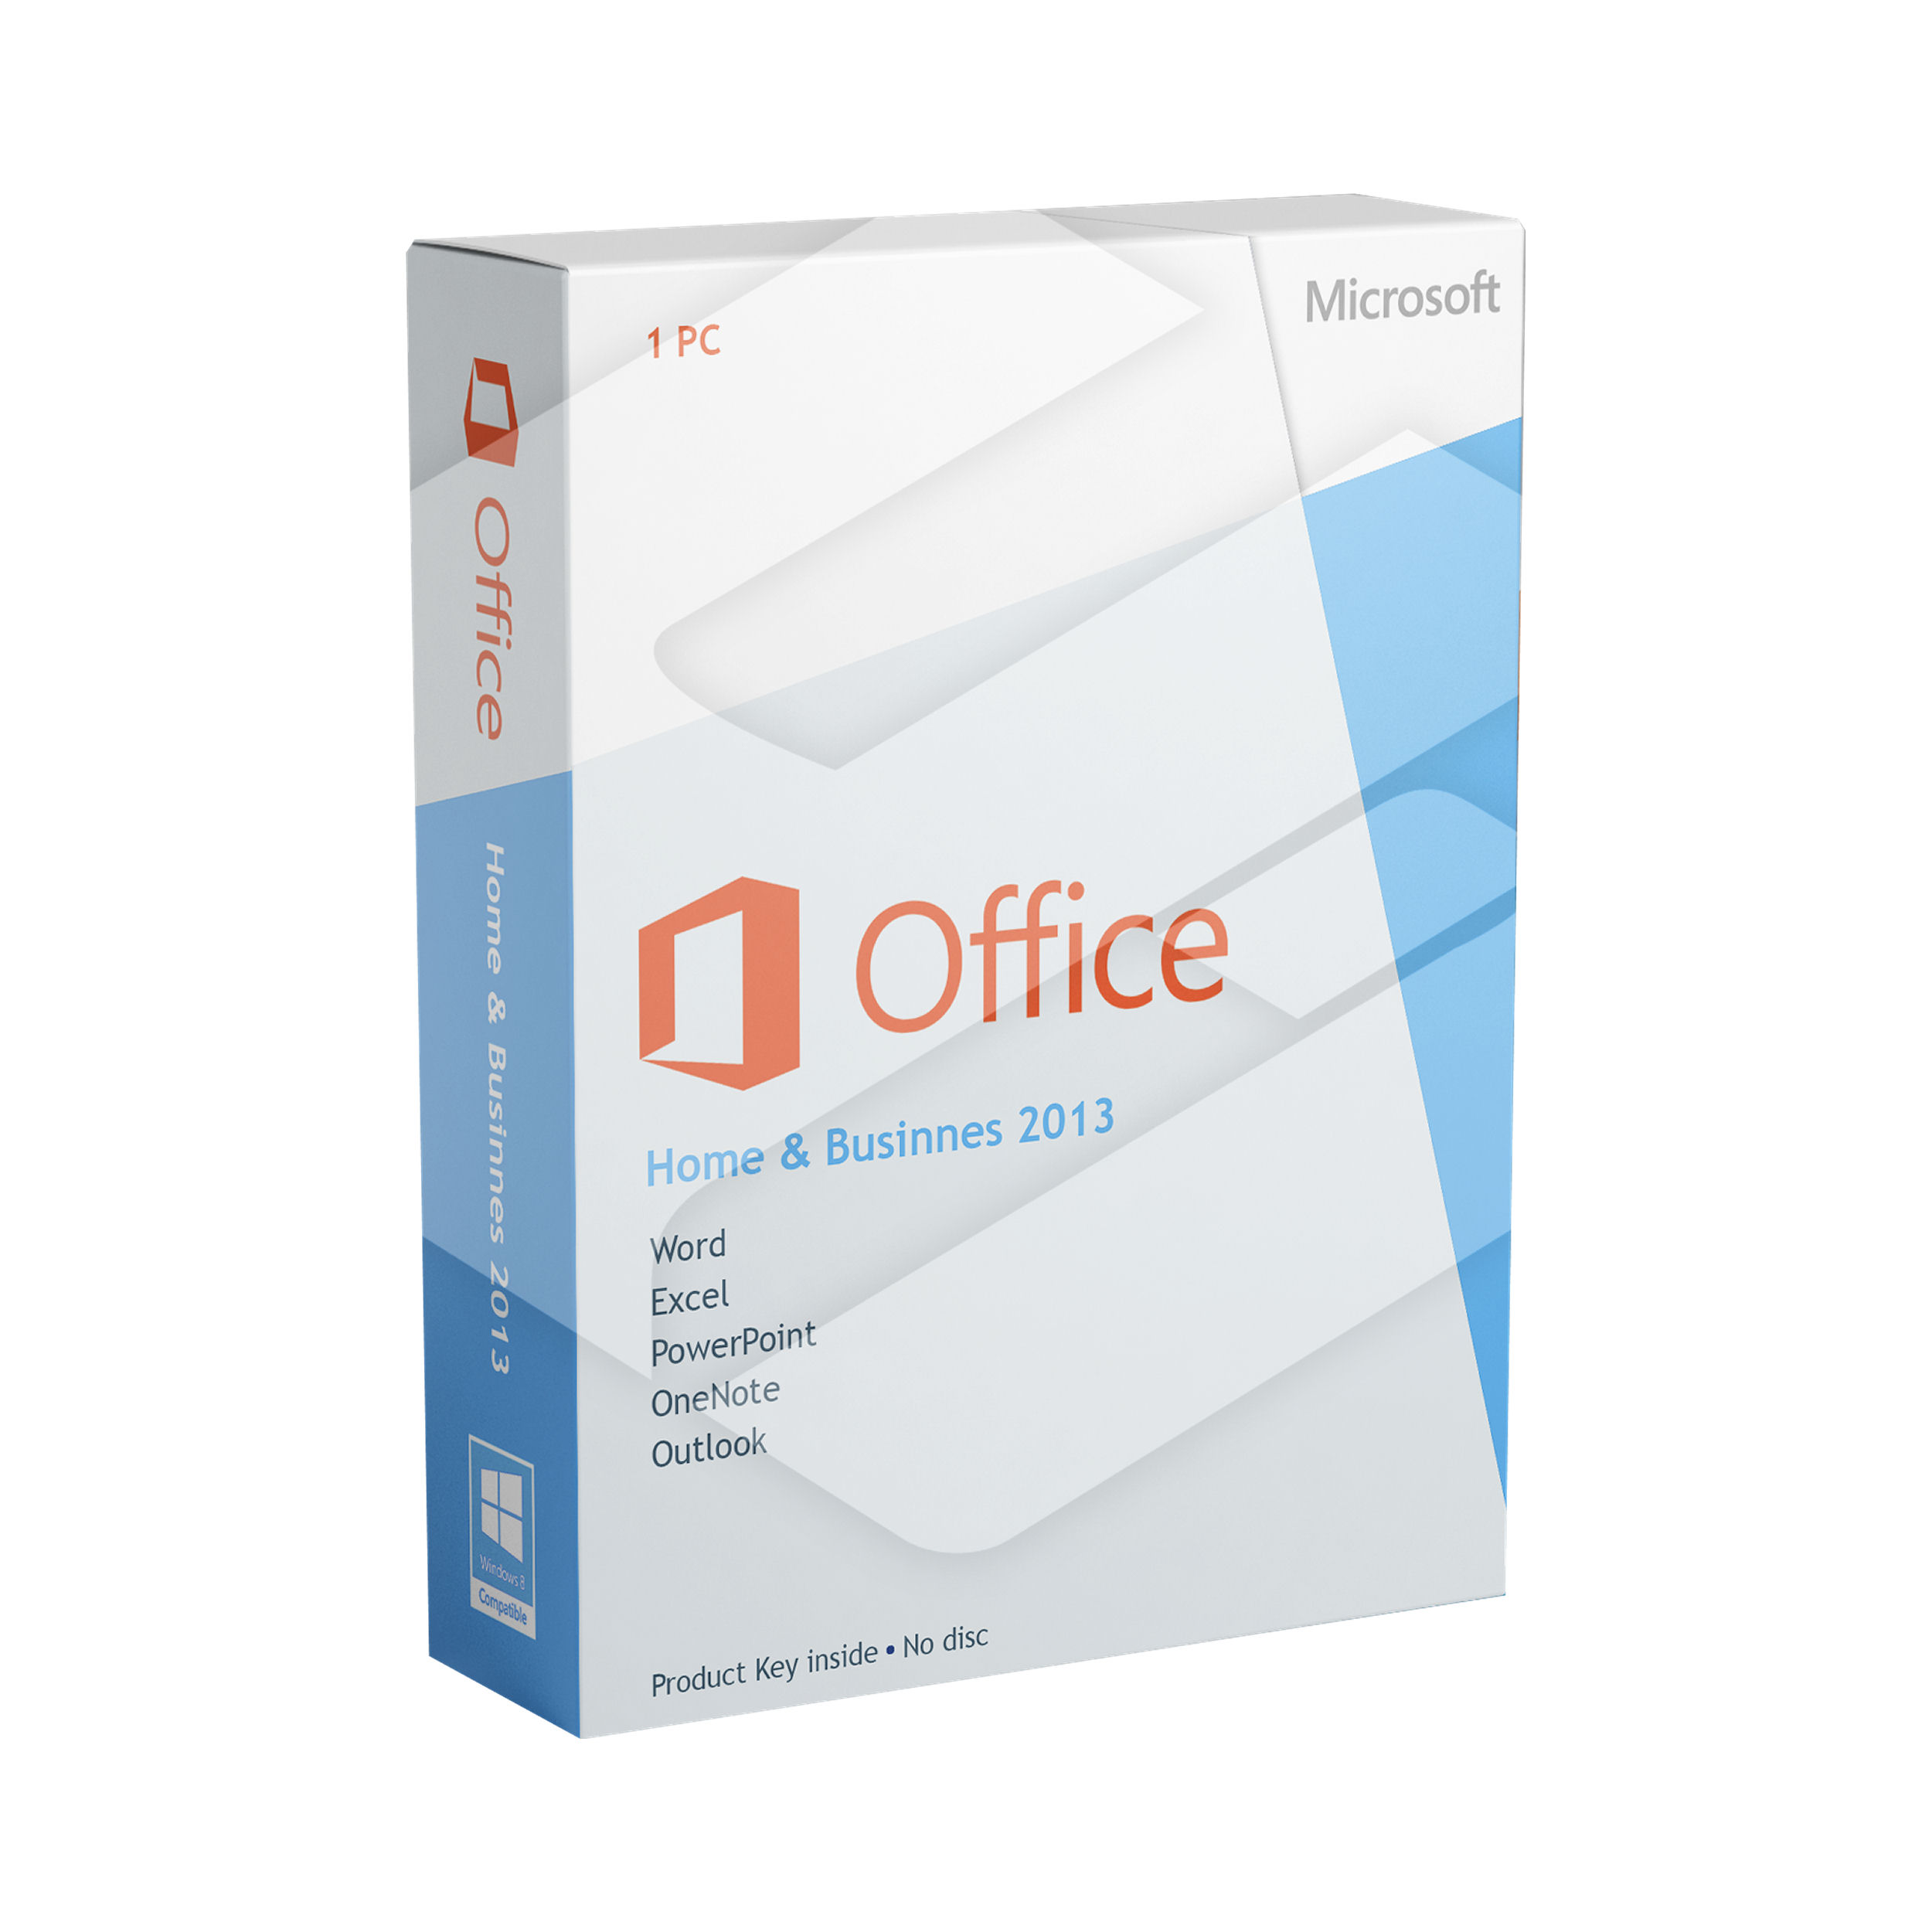 business in a box software activation key